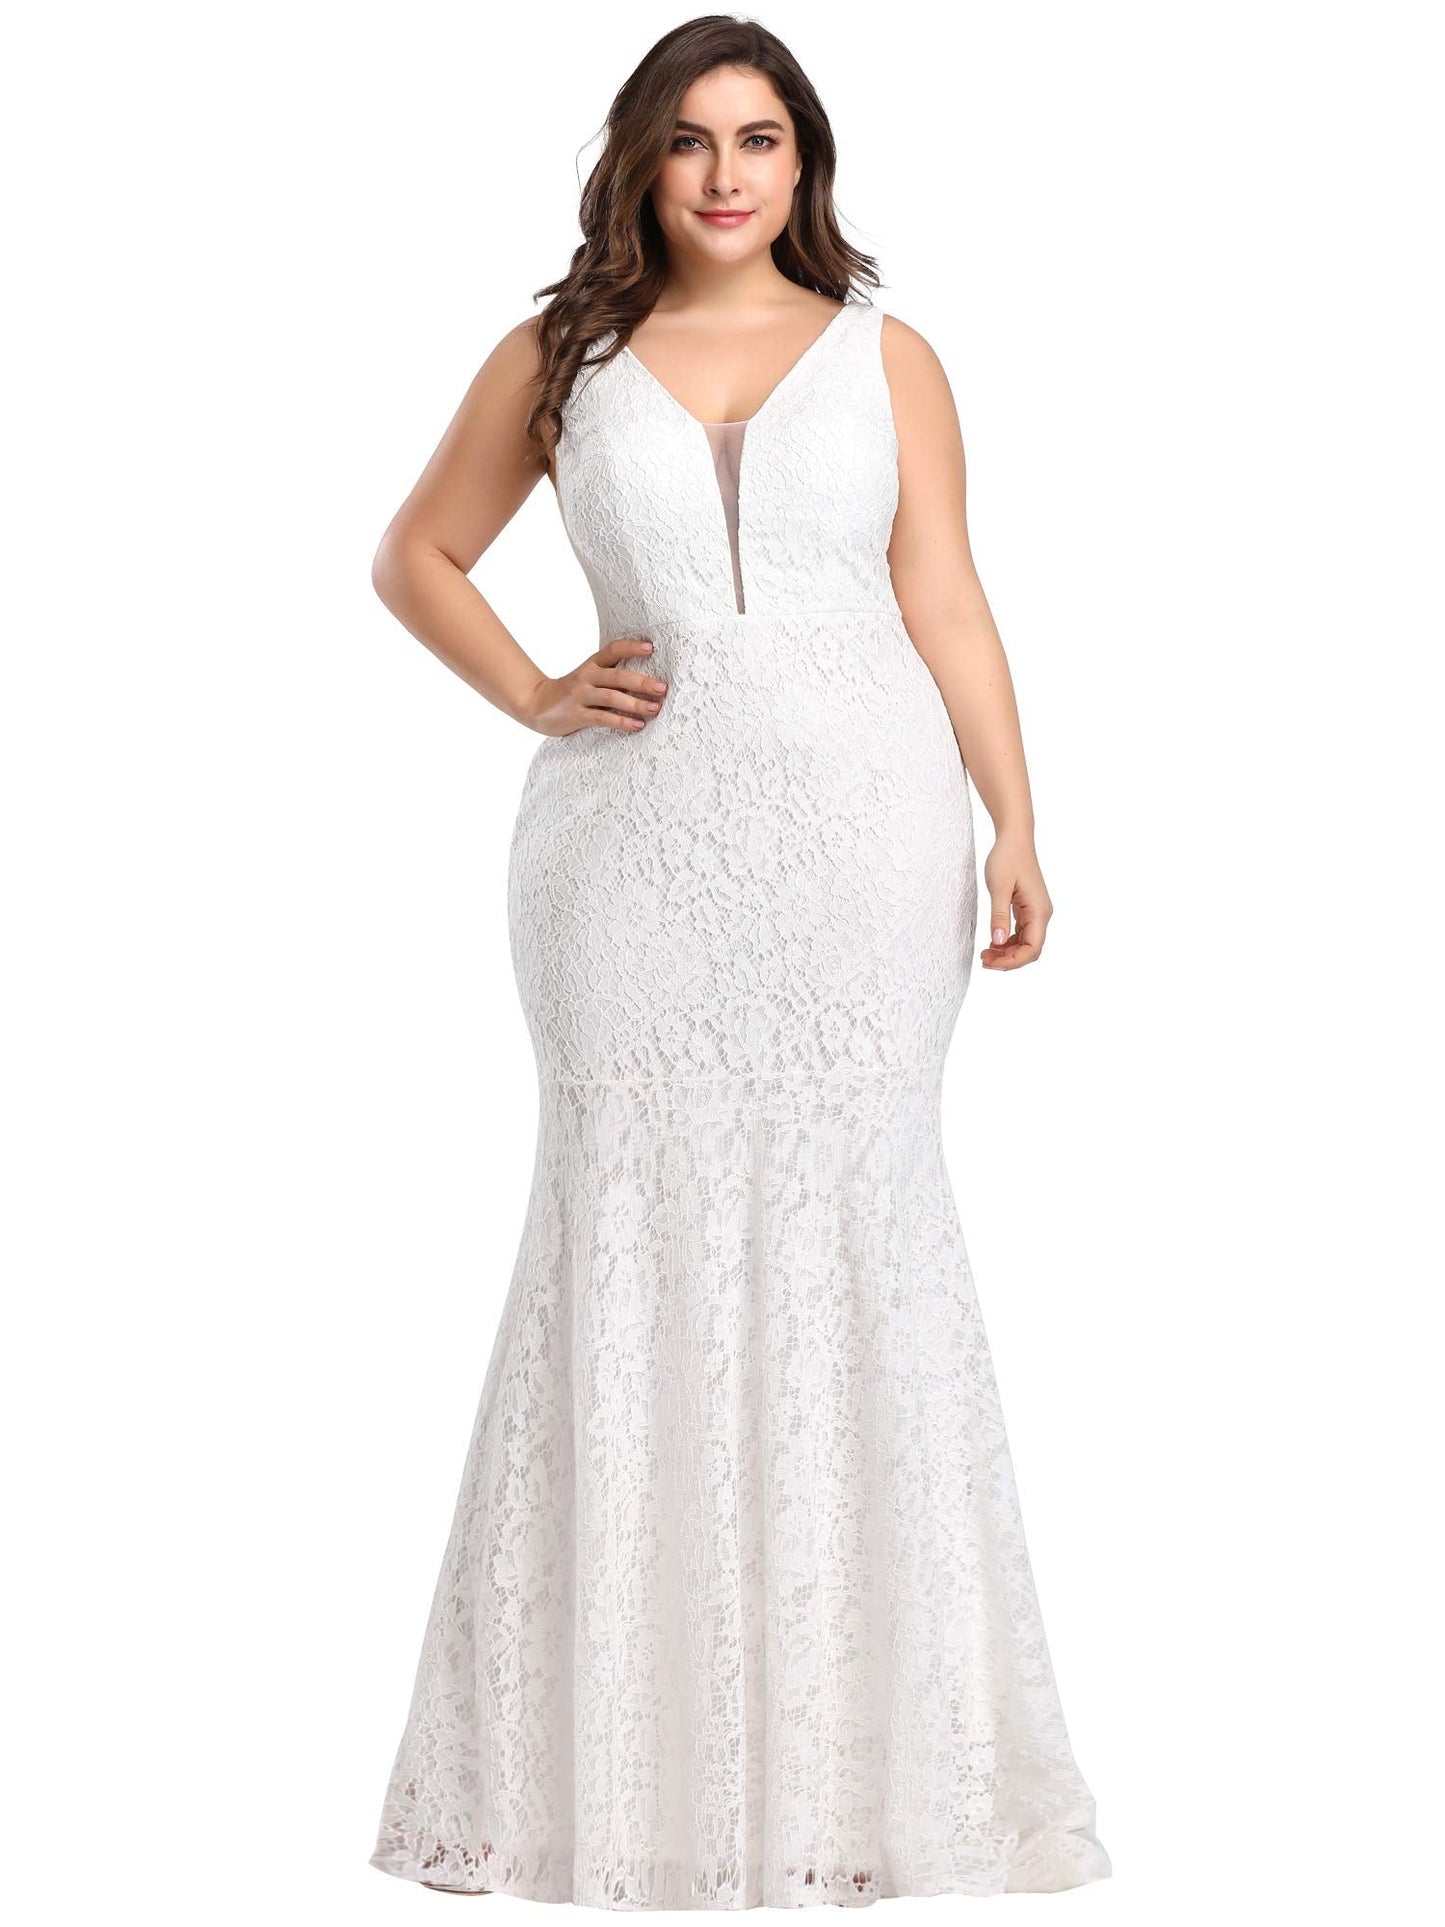 Women's Plus Size V-Neck Floral Lace Evening Party Mermaid Dress White US14 - Home Decor Gifts and More